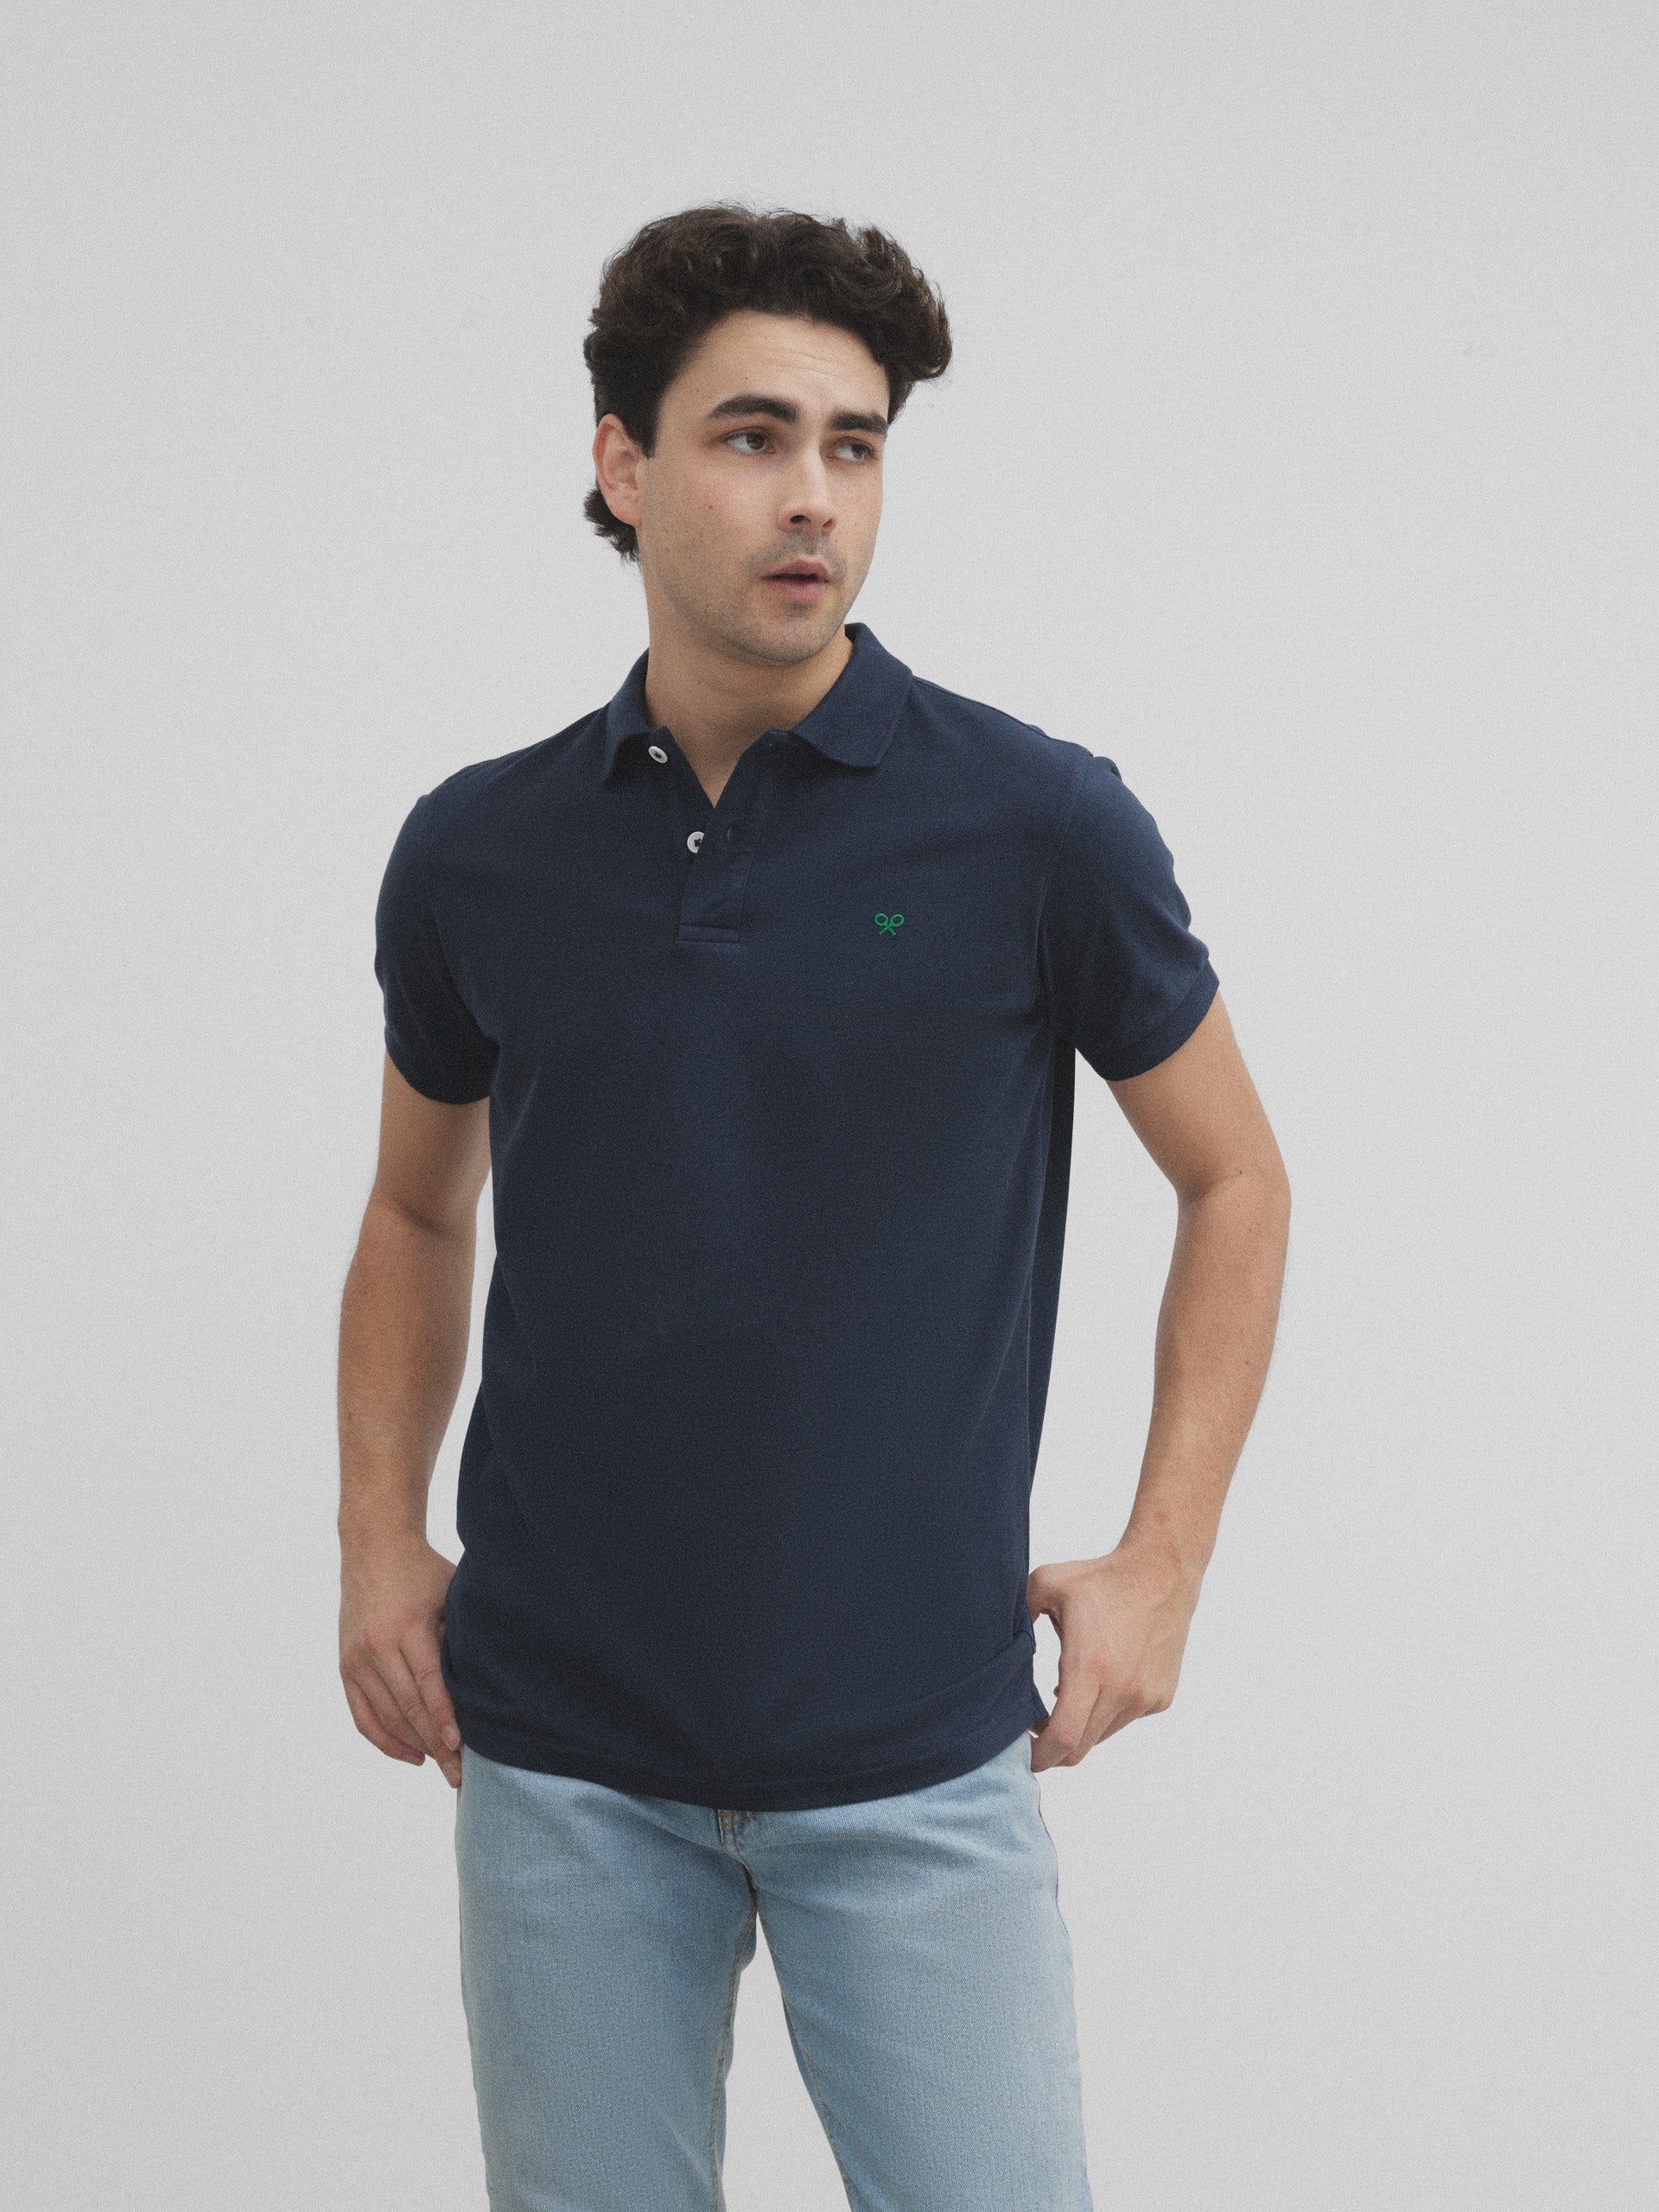 Navy blue green and white racket polo